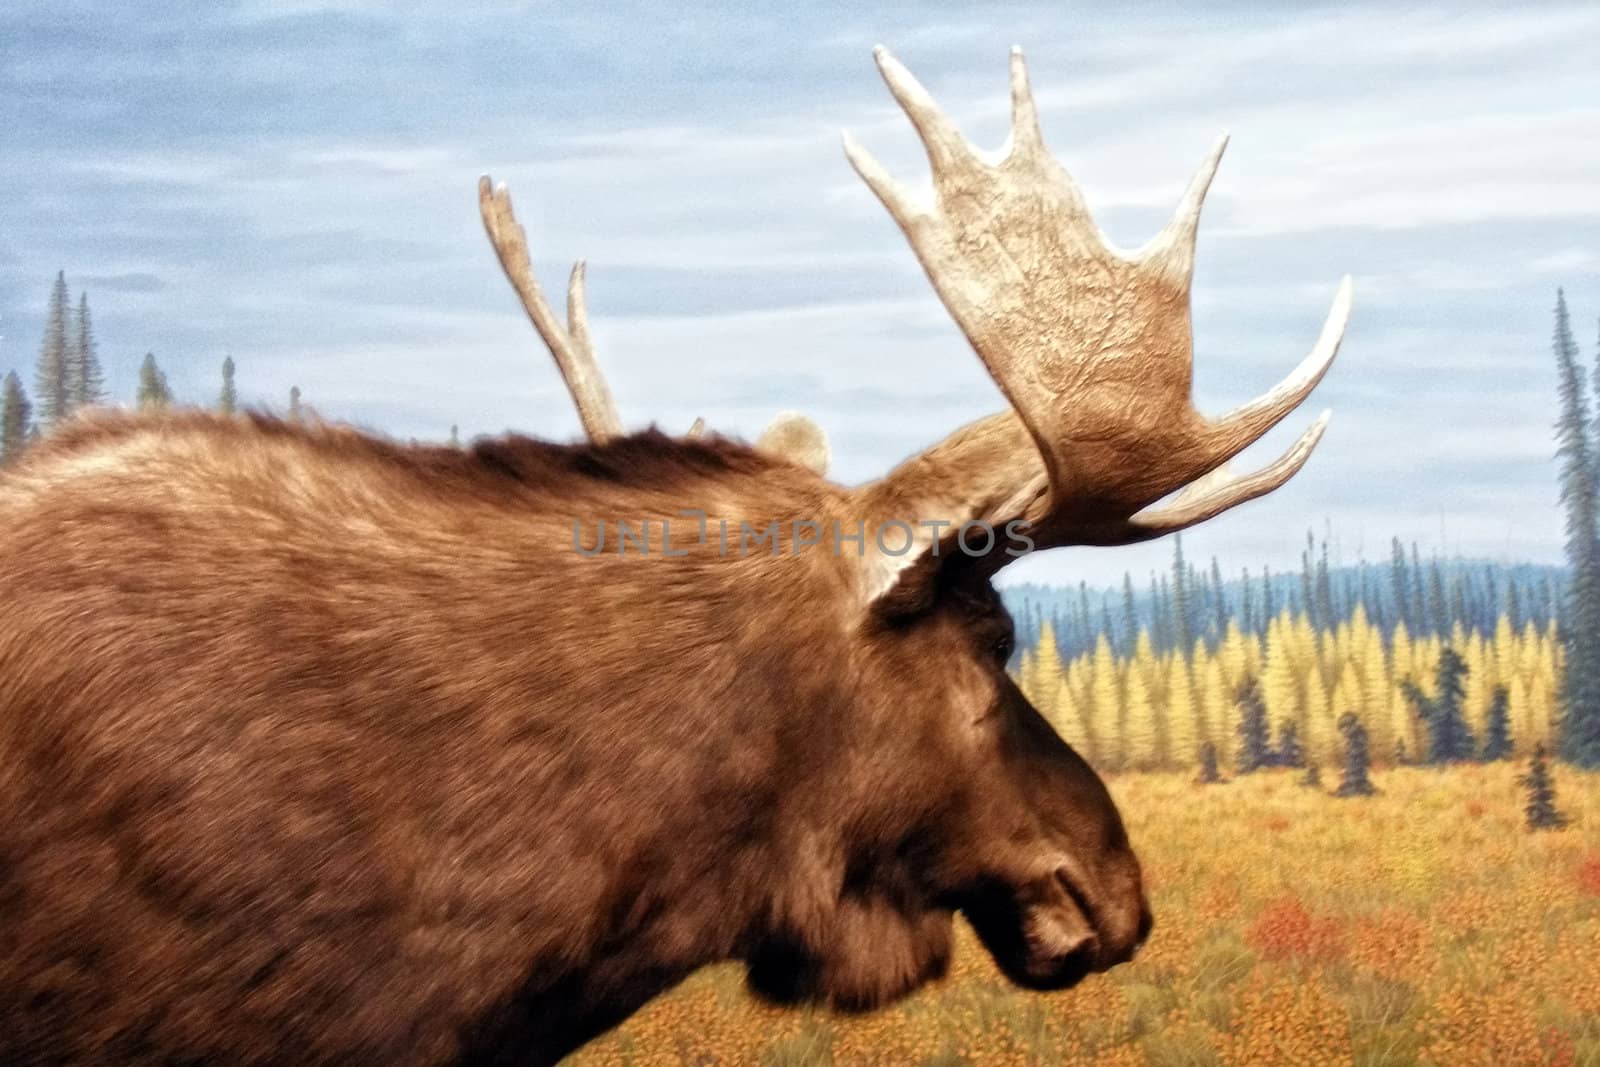 View of a moose on display at a museum.